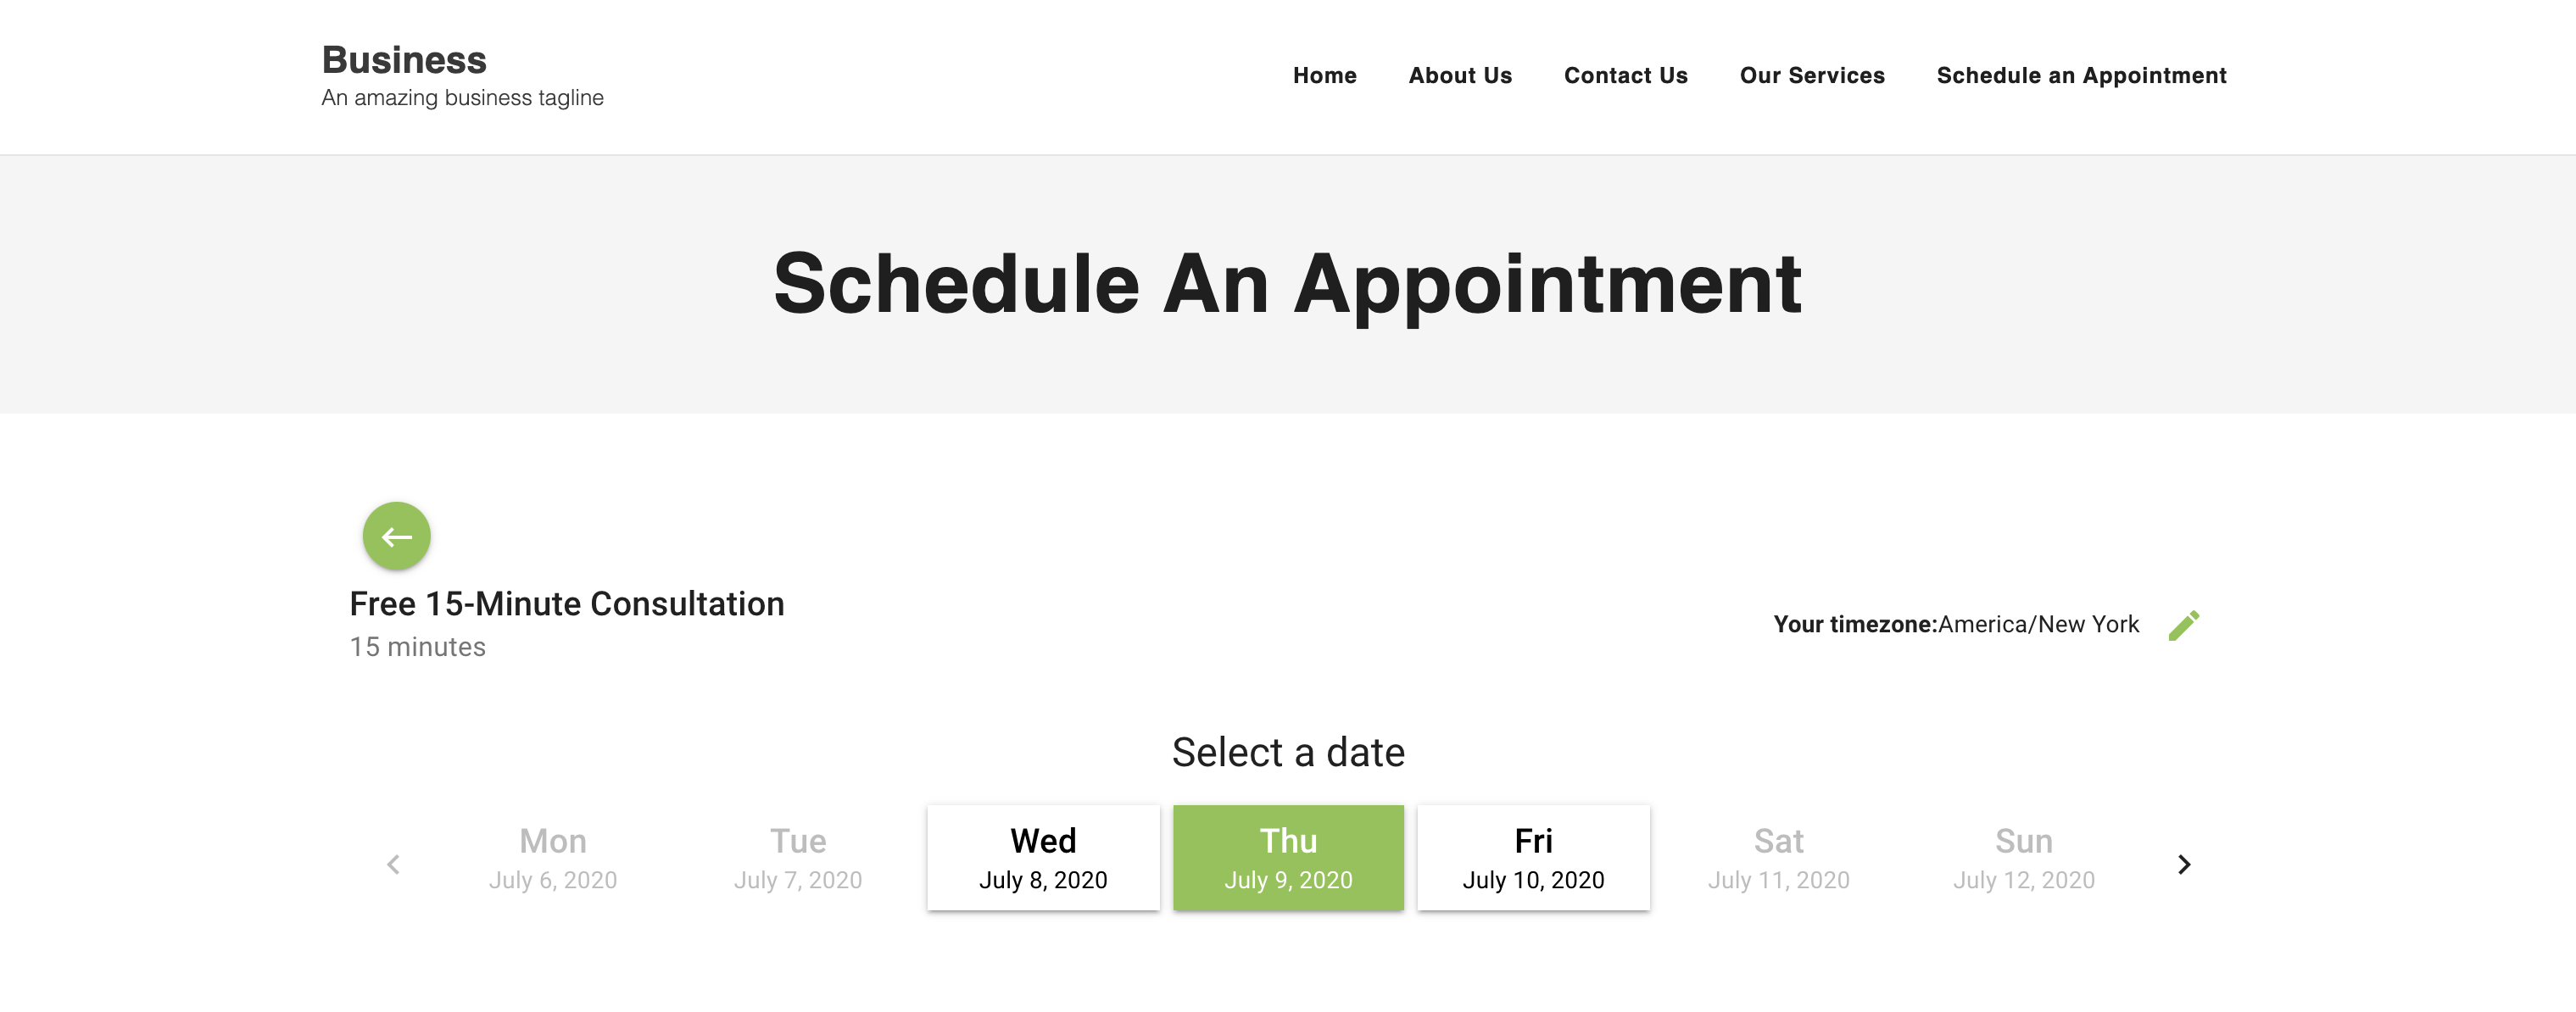 View the Booking Calendar Availability using a Monthly View.